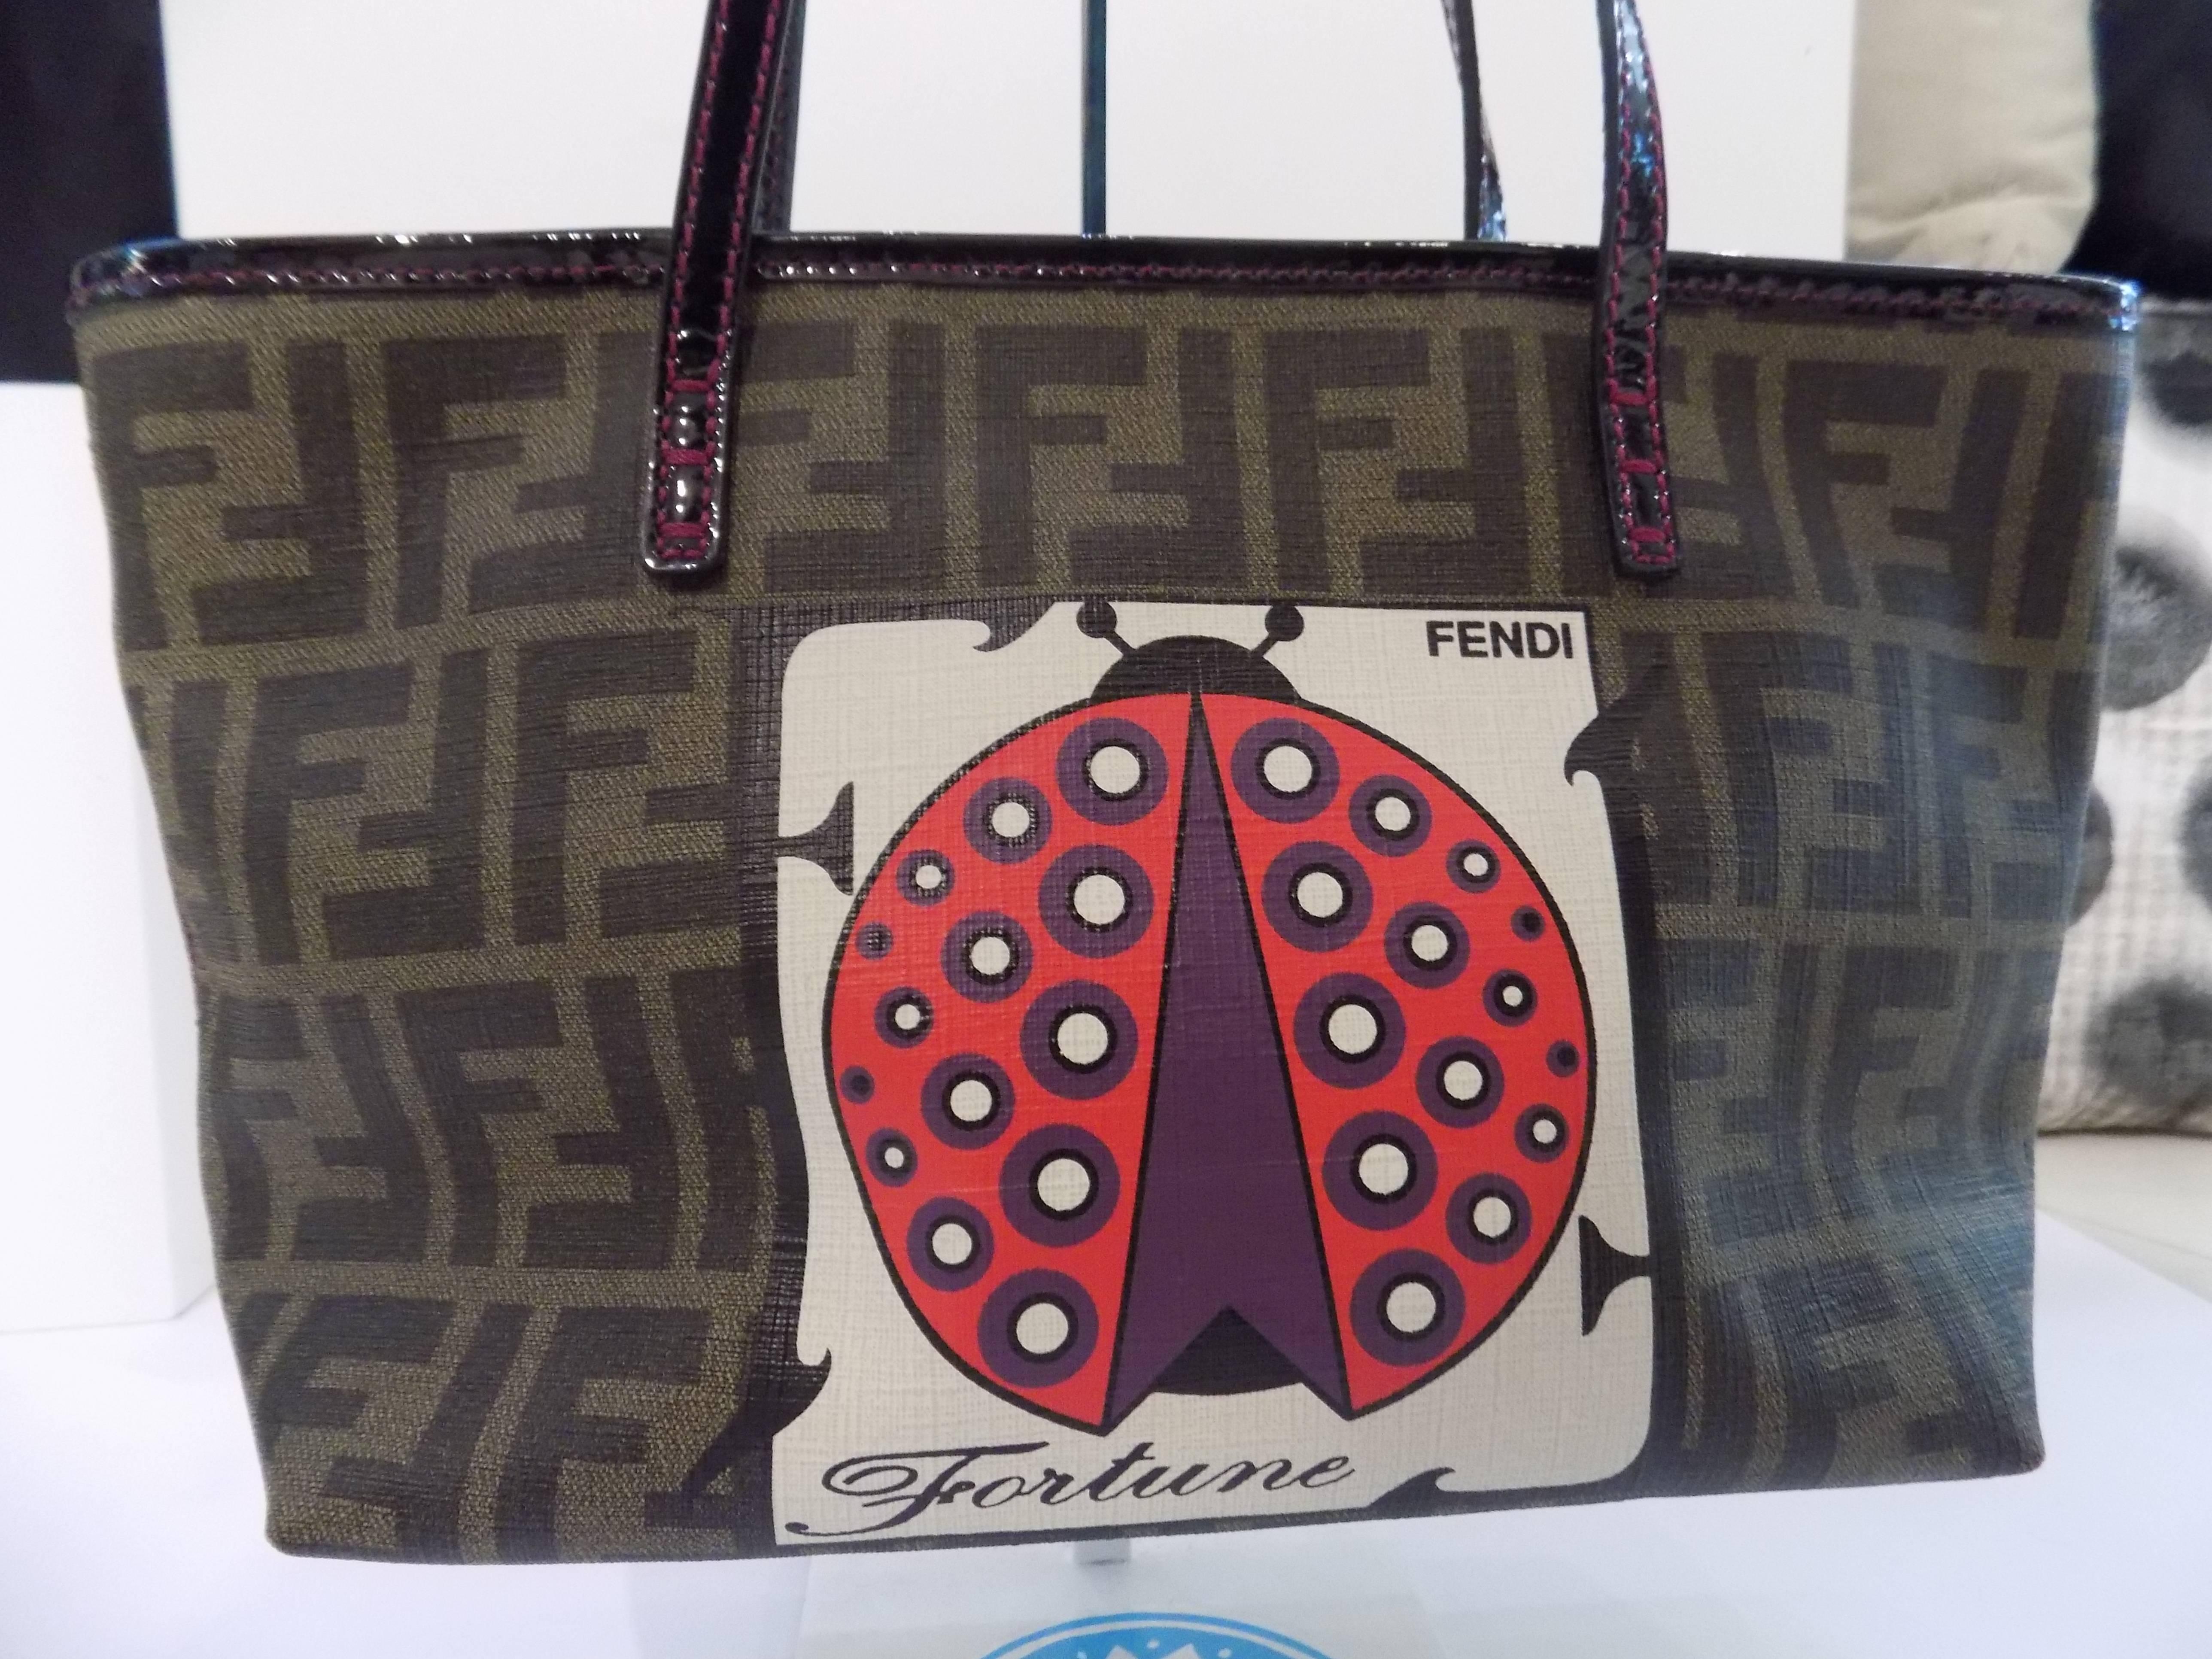 This authentic practical Fendi Zucca Print Canvas Spalmati Lady Bug Tote Bag makes a perfect everyday carryall. It features durable Fendi Zucca printed canvas with patent leather trim and large screen print of a lady bug on the front. This bag has a